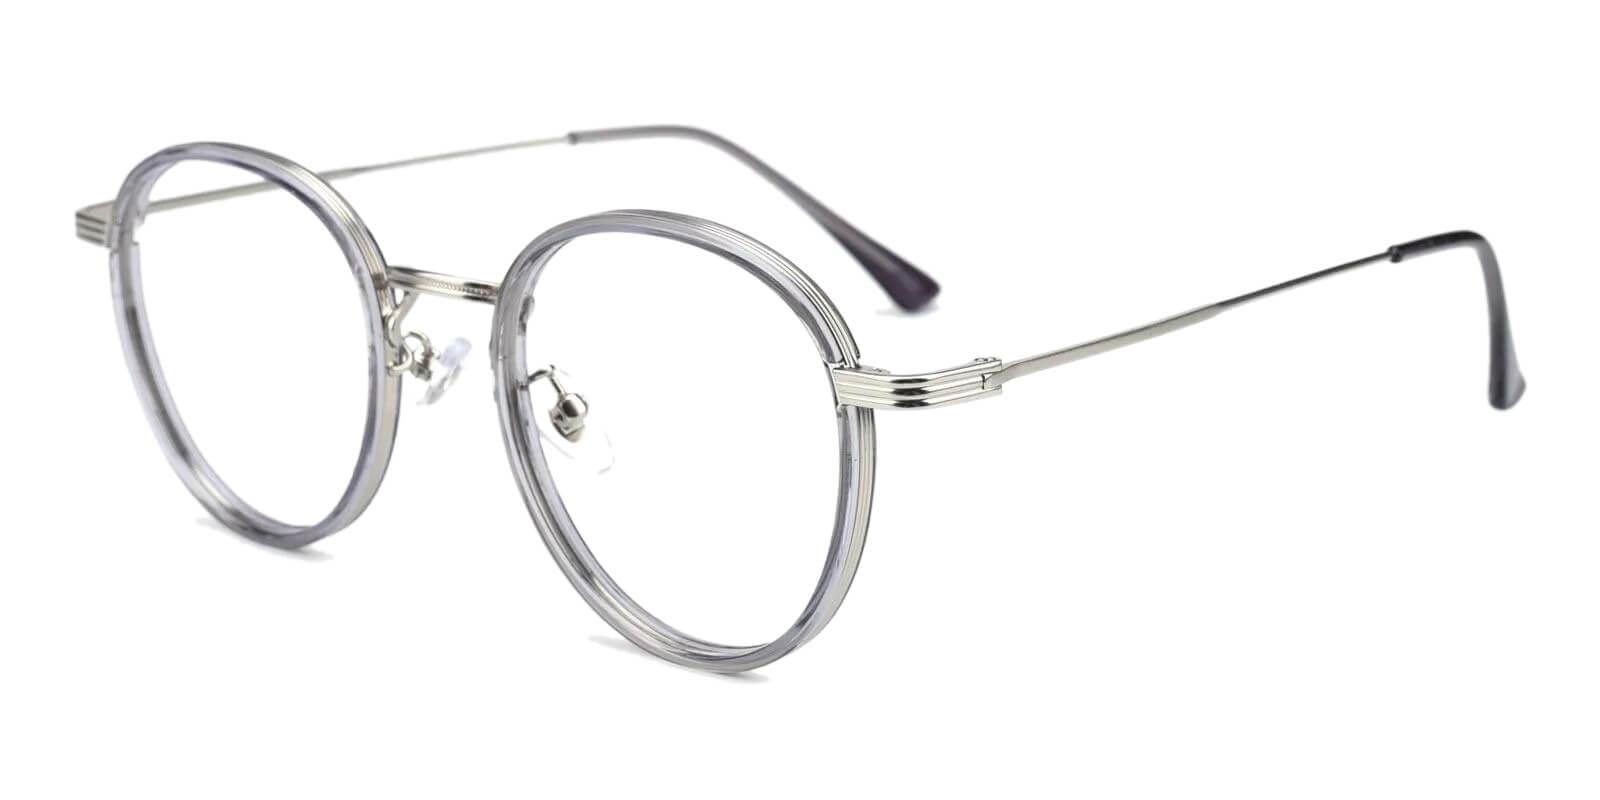 Quennell Gray Metal Eyeglasses , Fashion , NosePads Frames from ABBE Glasses